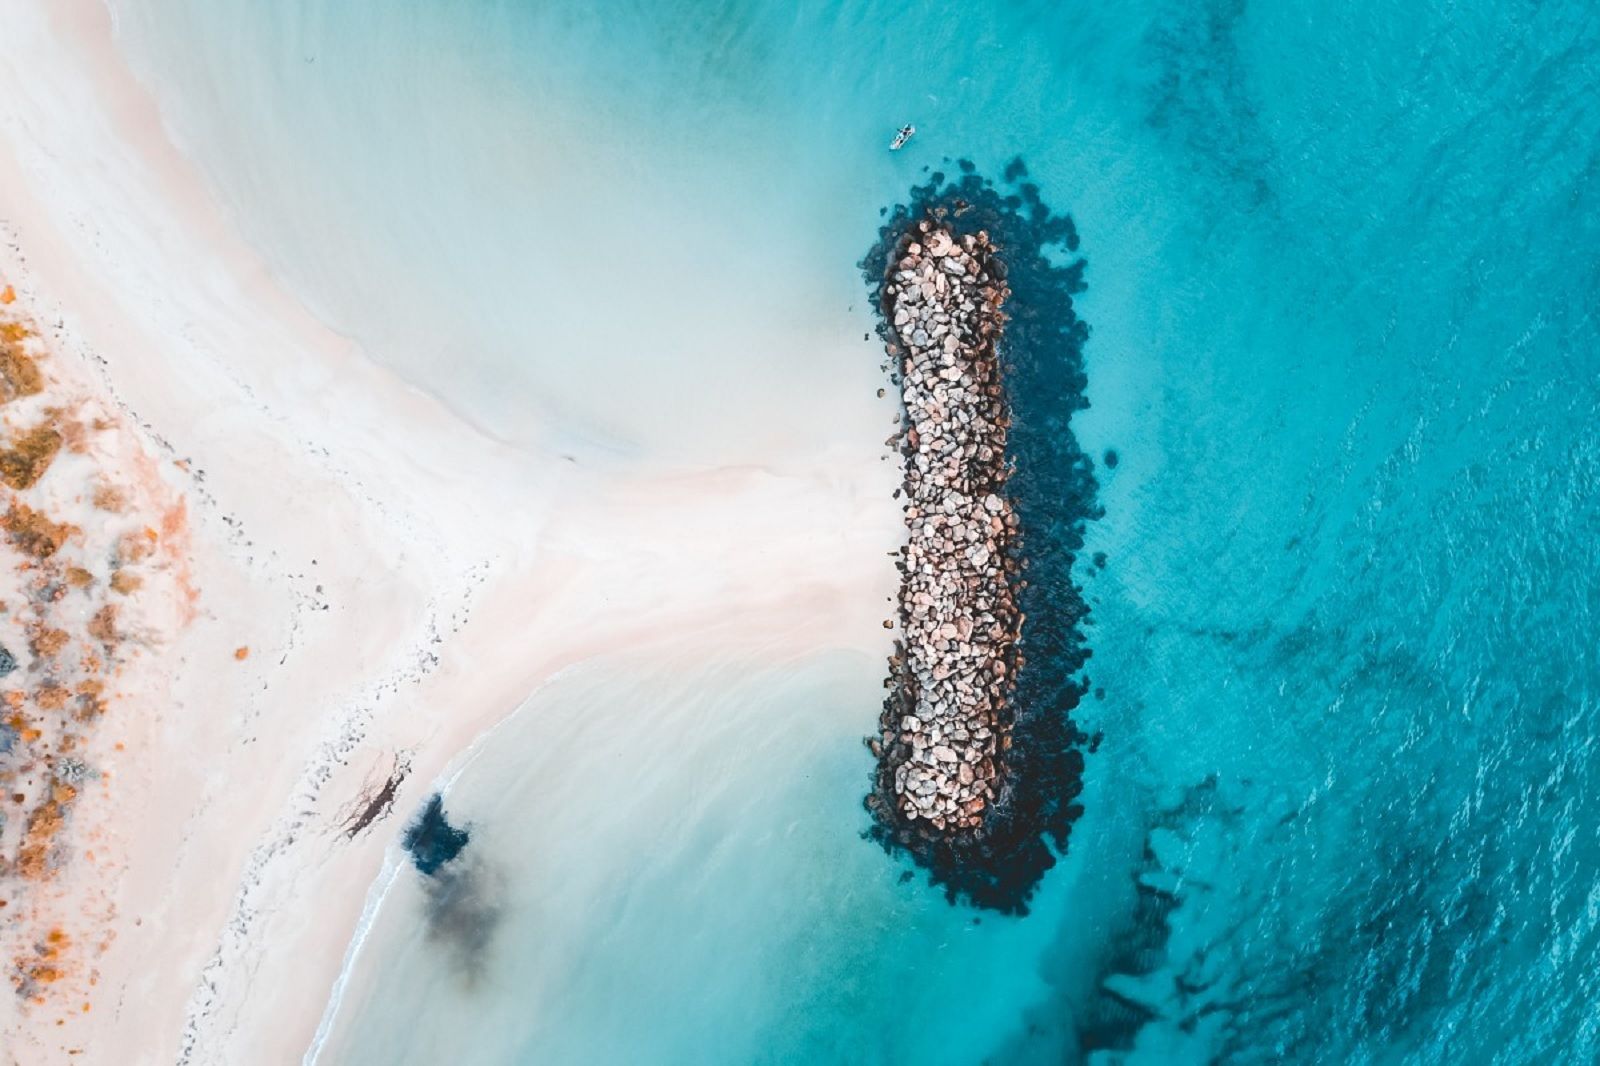 Best Drone Photos ever taken image 1